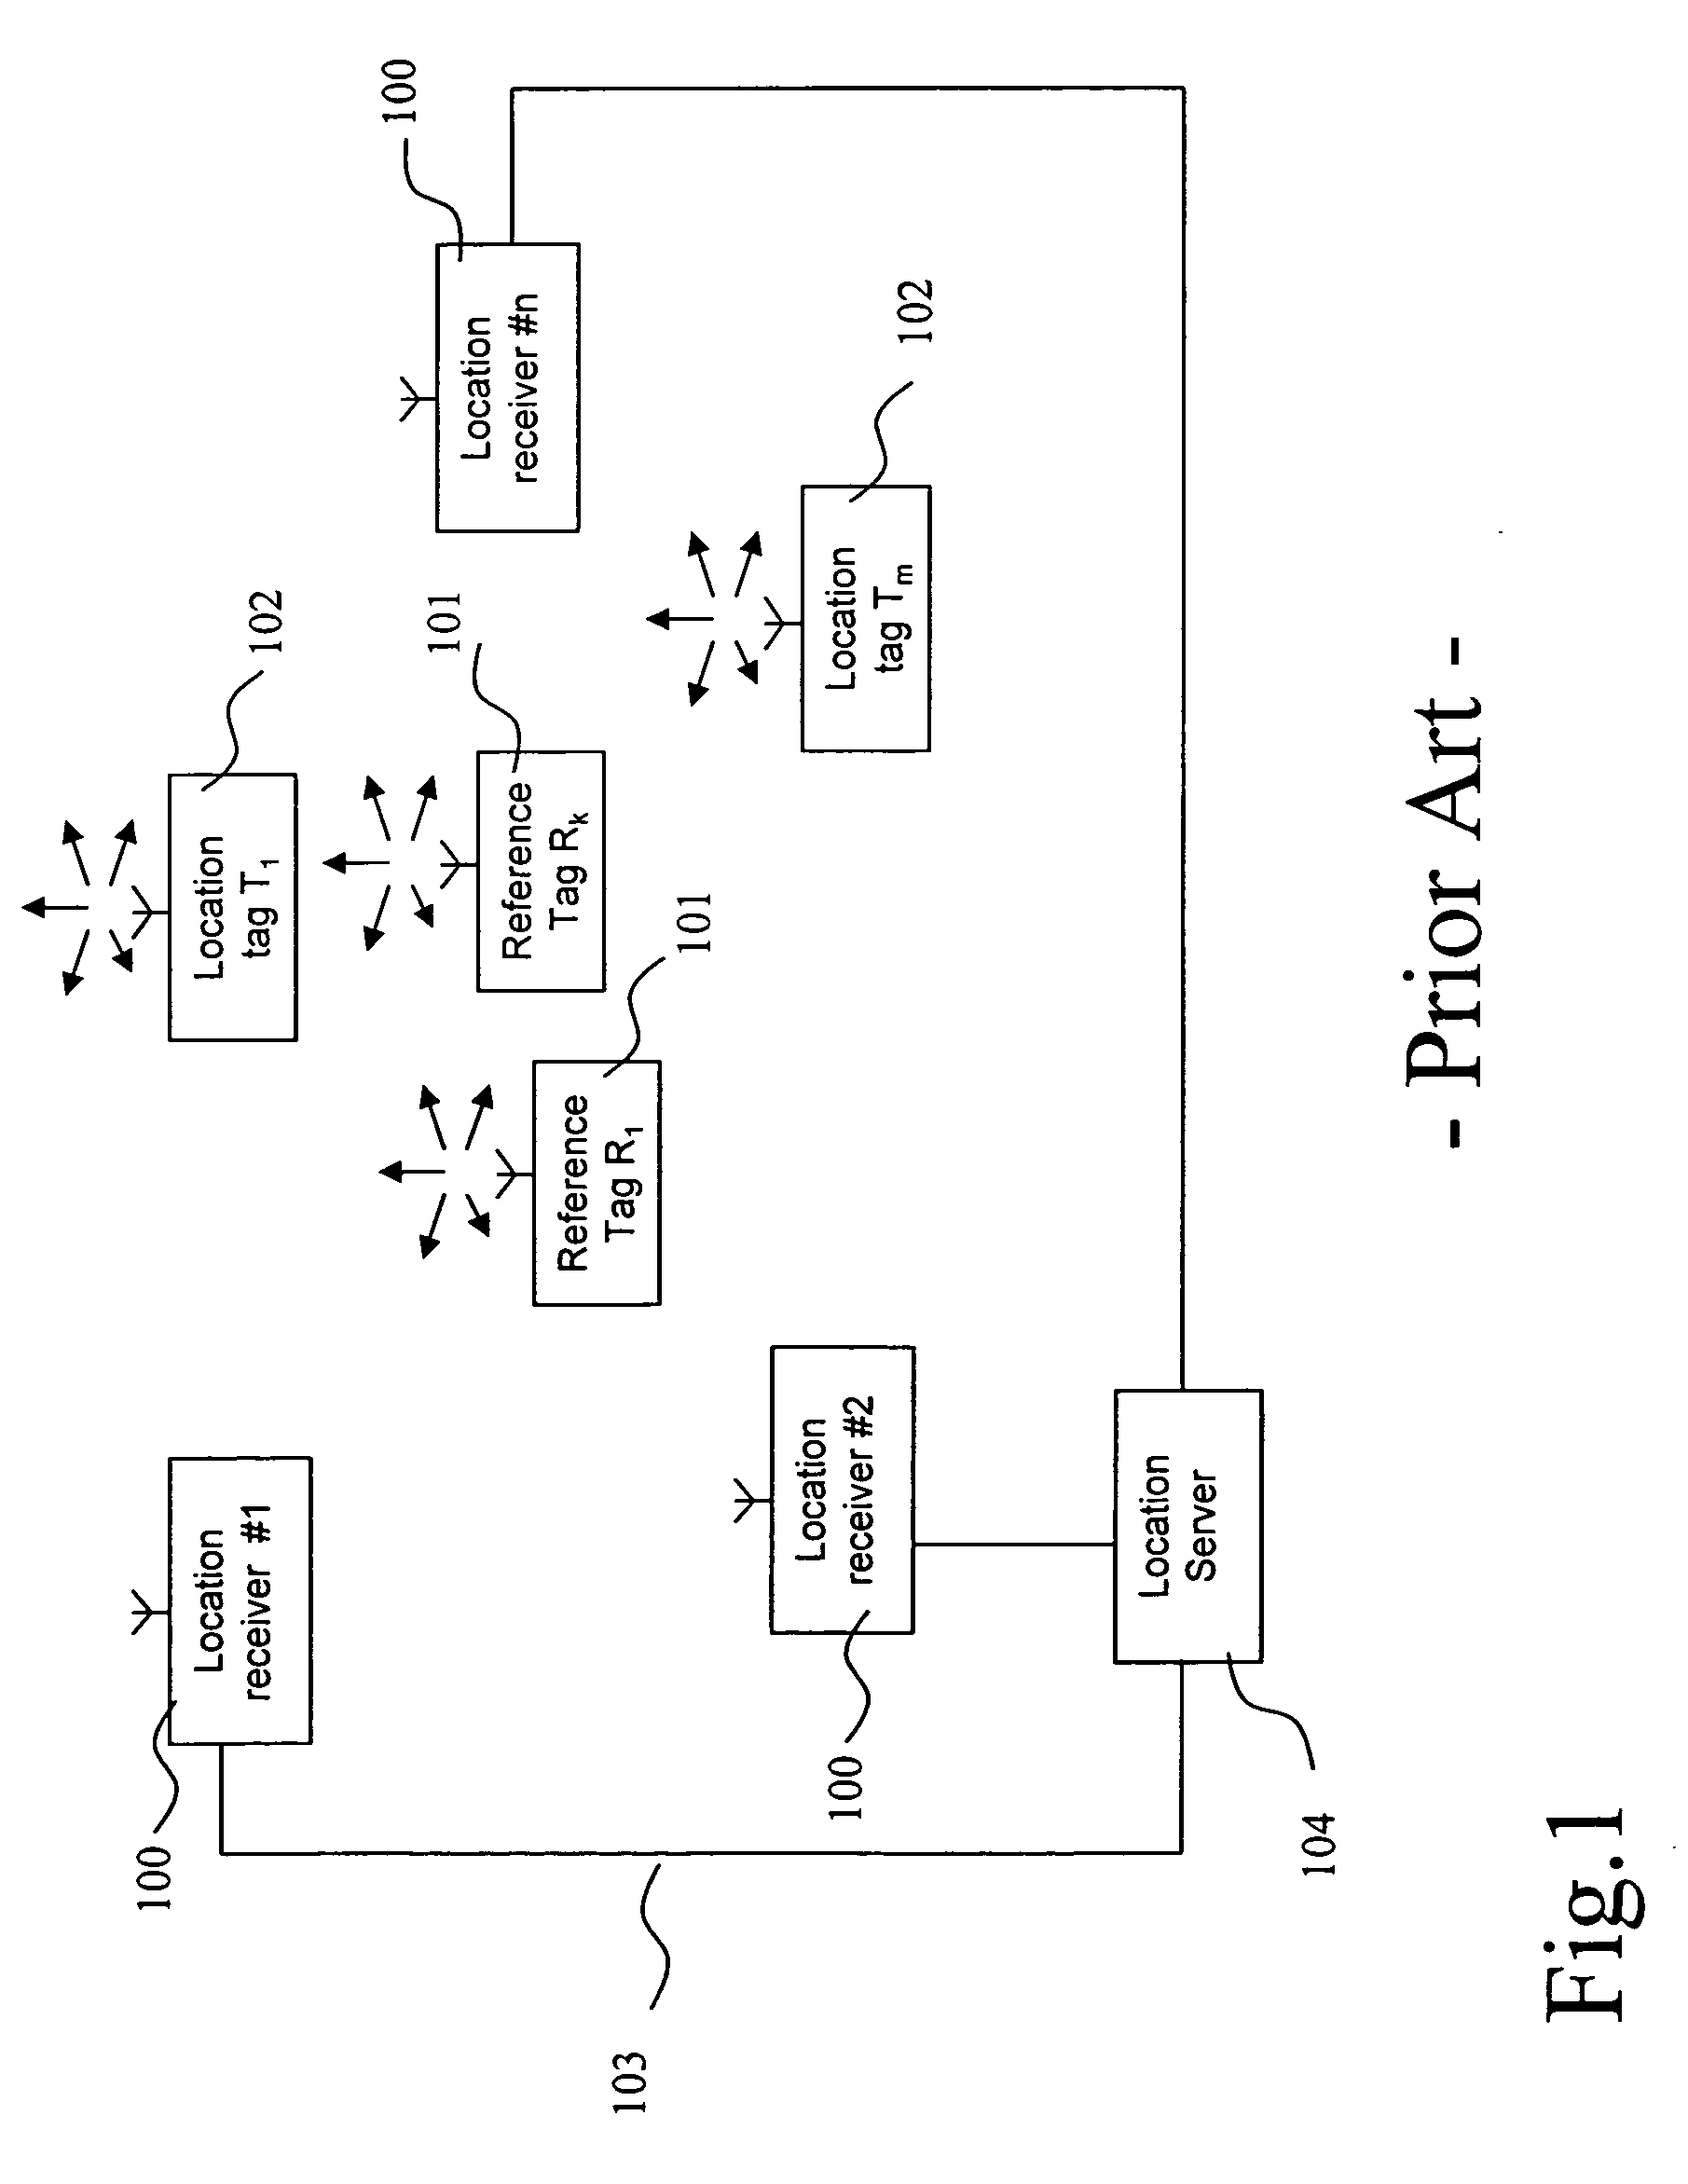 Method and System for Multipath Reduction for Wireless Synchronizing and/or Locating